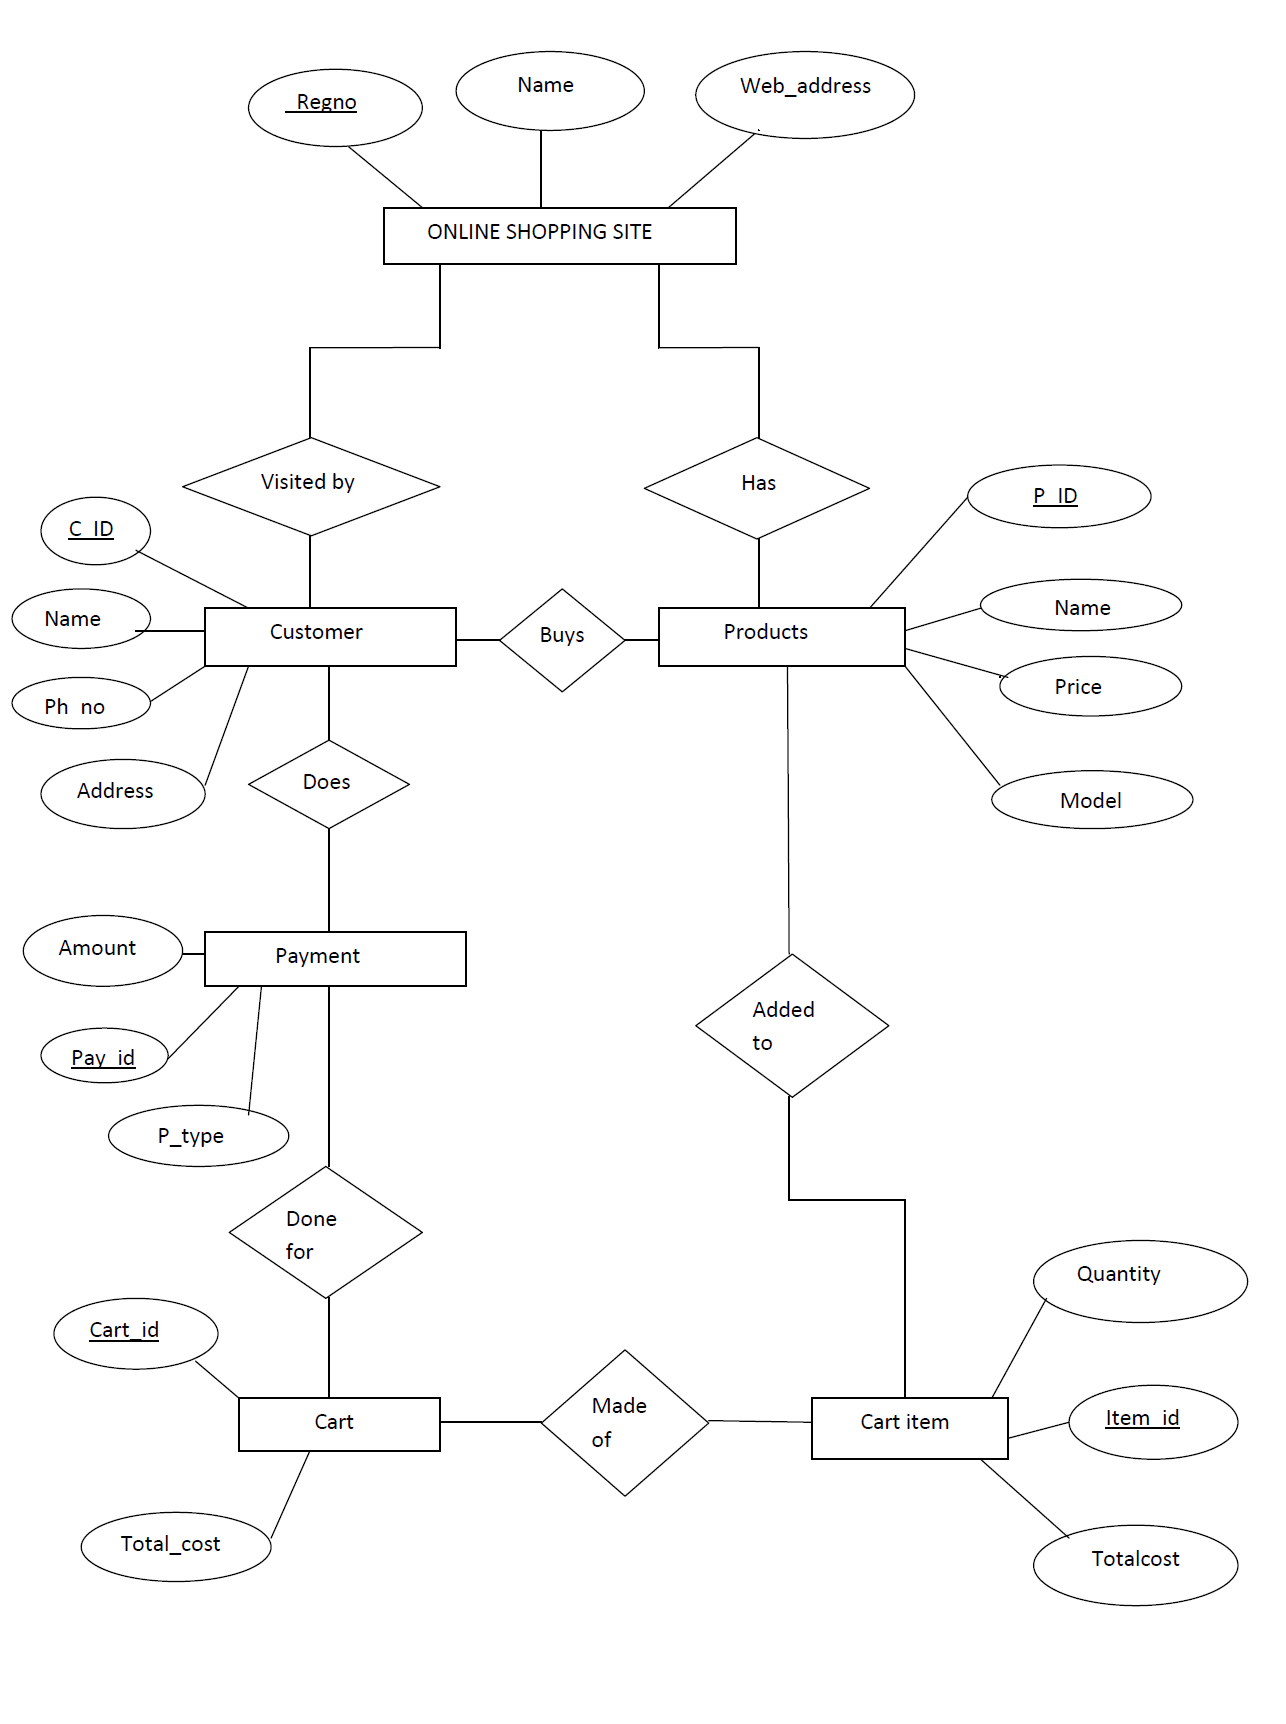 Mapping Er Diagram To Relational Model (Rollno:50) | Lbs pertaining to Er Diagram For Website